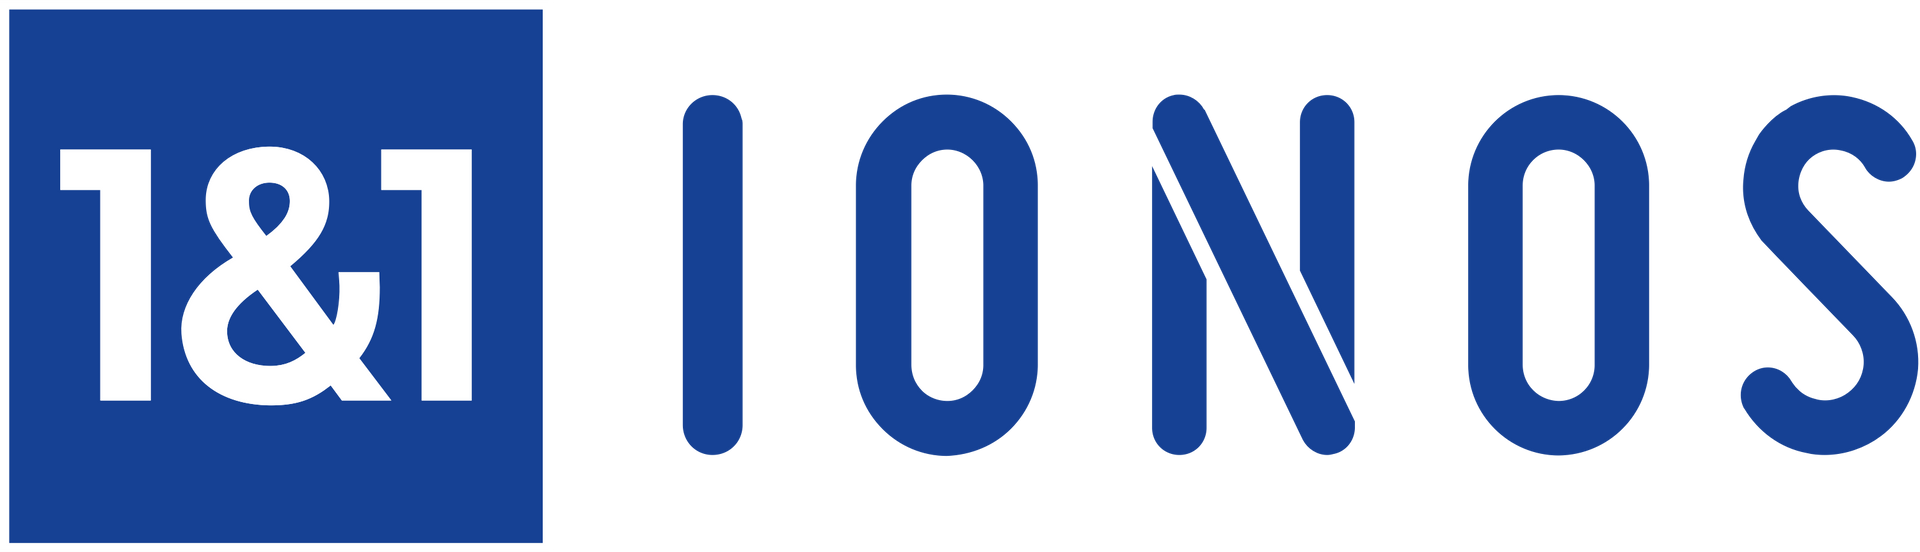 Empower your online presence with the unmistakable IONOS symbol! 🌐✨ Our logo embodies reliability, innovation, and seamless connectivity. Join the digital revolution with IONOS — where your vision meets unparalleled technology. #IONOS #DigitalEmpowerment #InnovationIcon